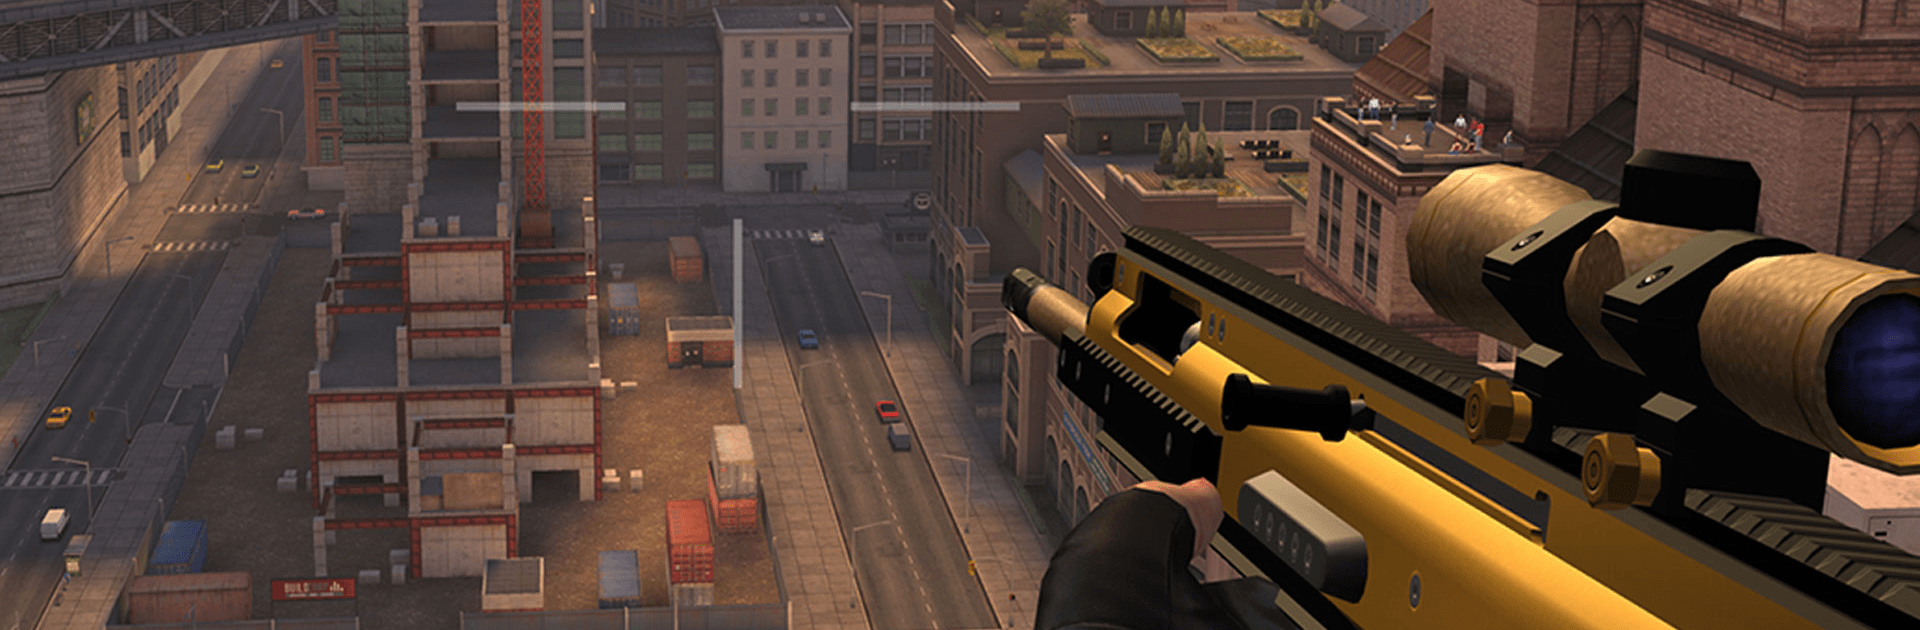 Play Pure Sniper Gun Shooter Games Online for Free on PC and Mobile now.gg